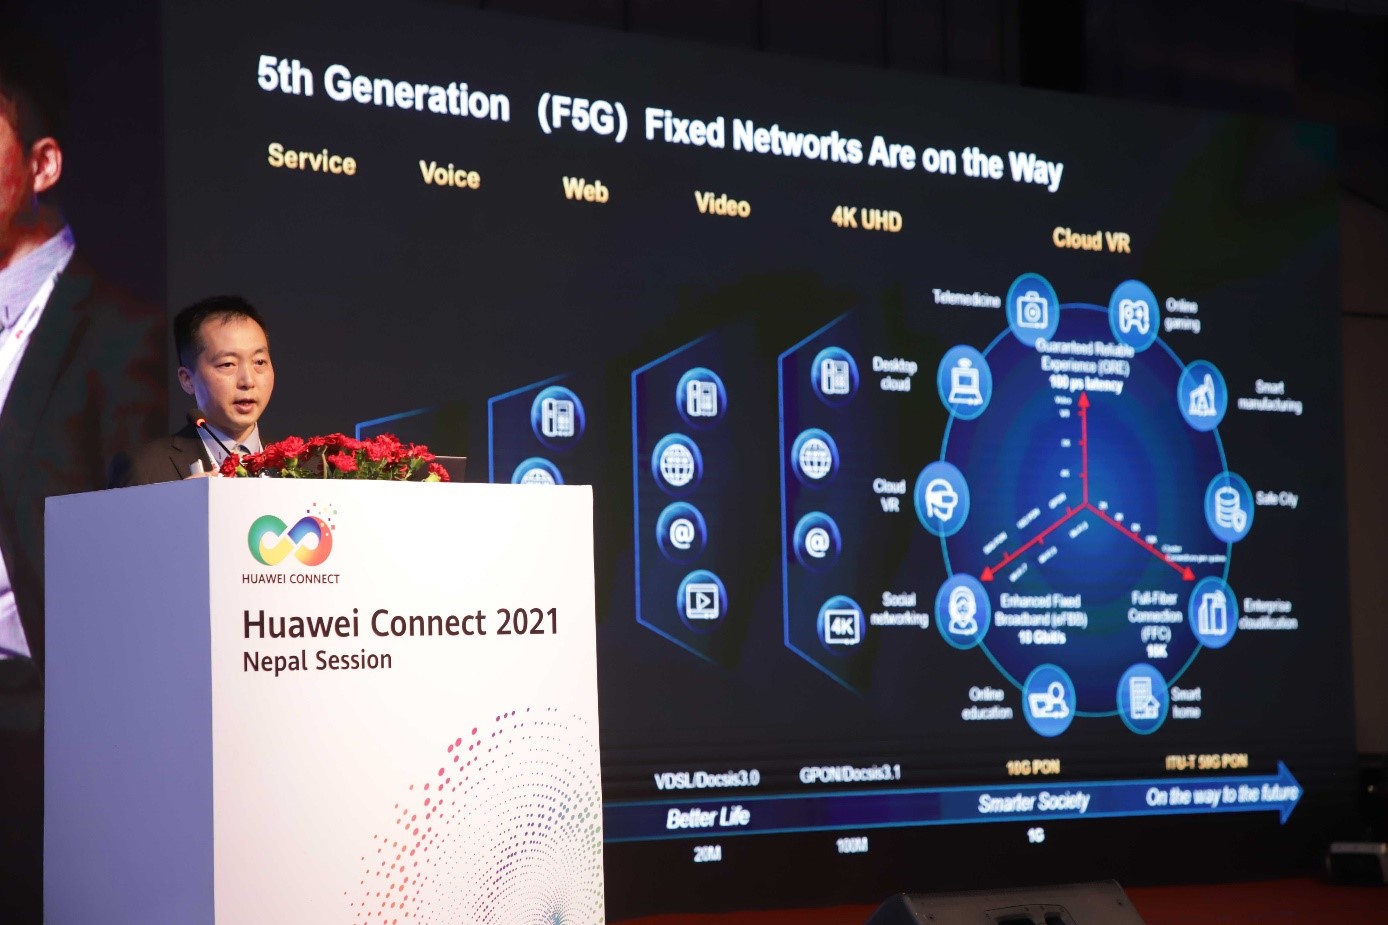 Mr. Justin Chen, Senior Solution Manager, Huawei Asia Pacific Internet Service